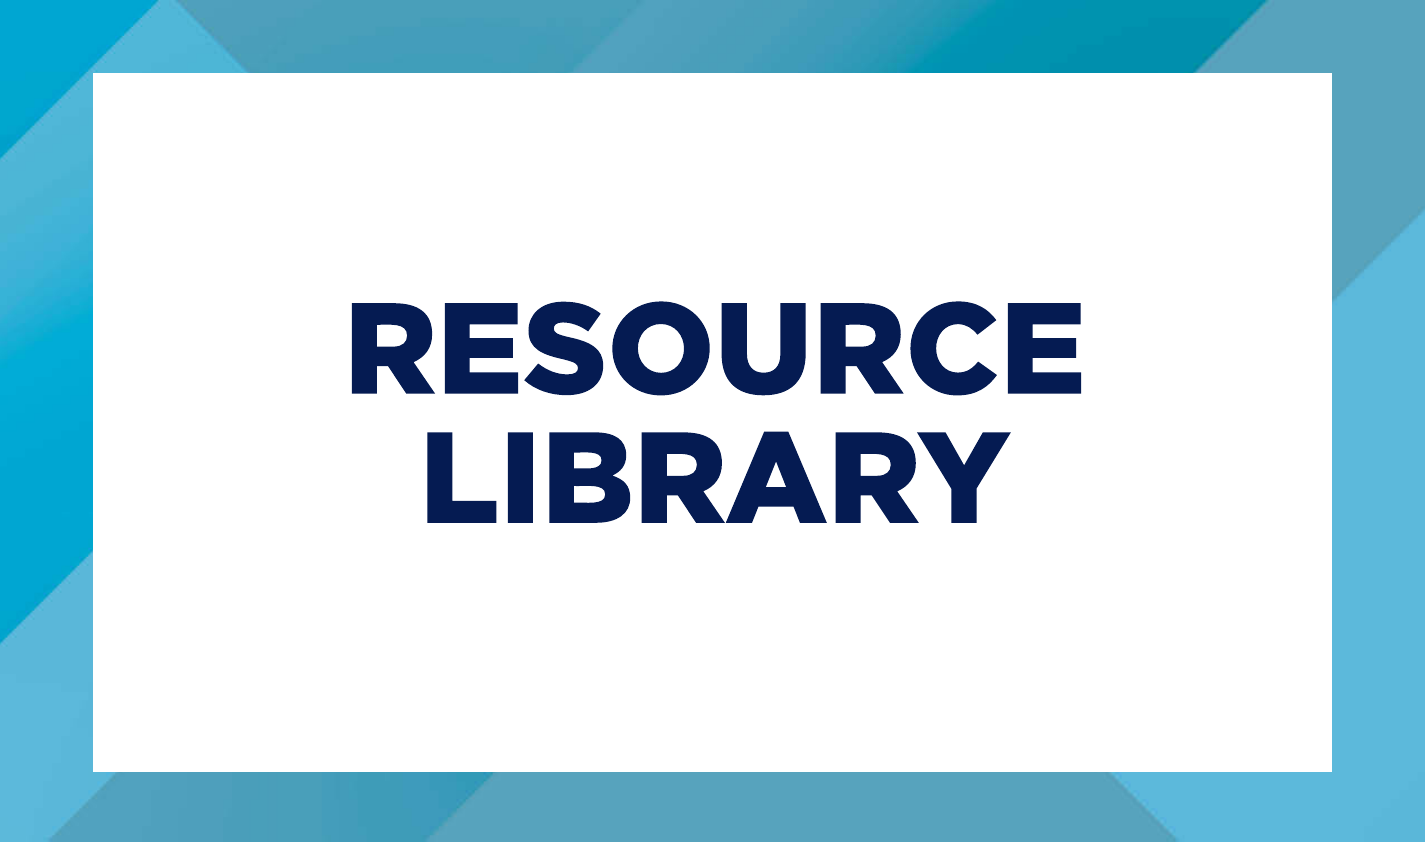 VIP has a library of professional development resources all for you to learn at your own leisure.